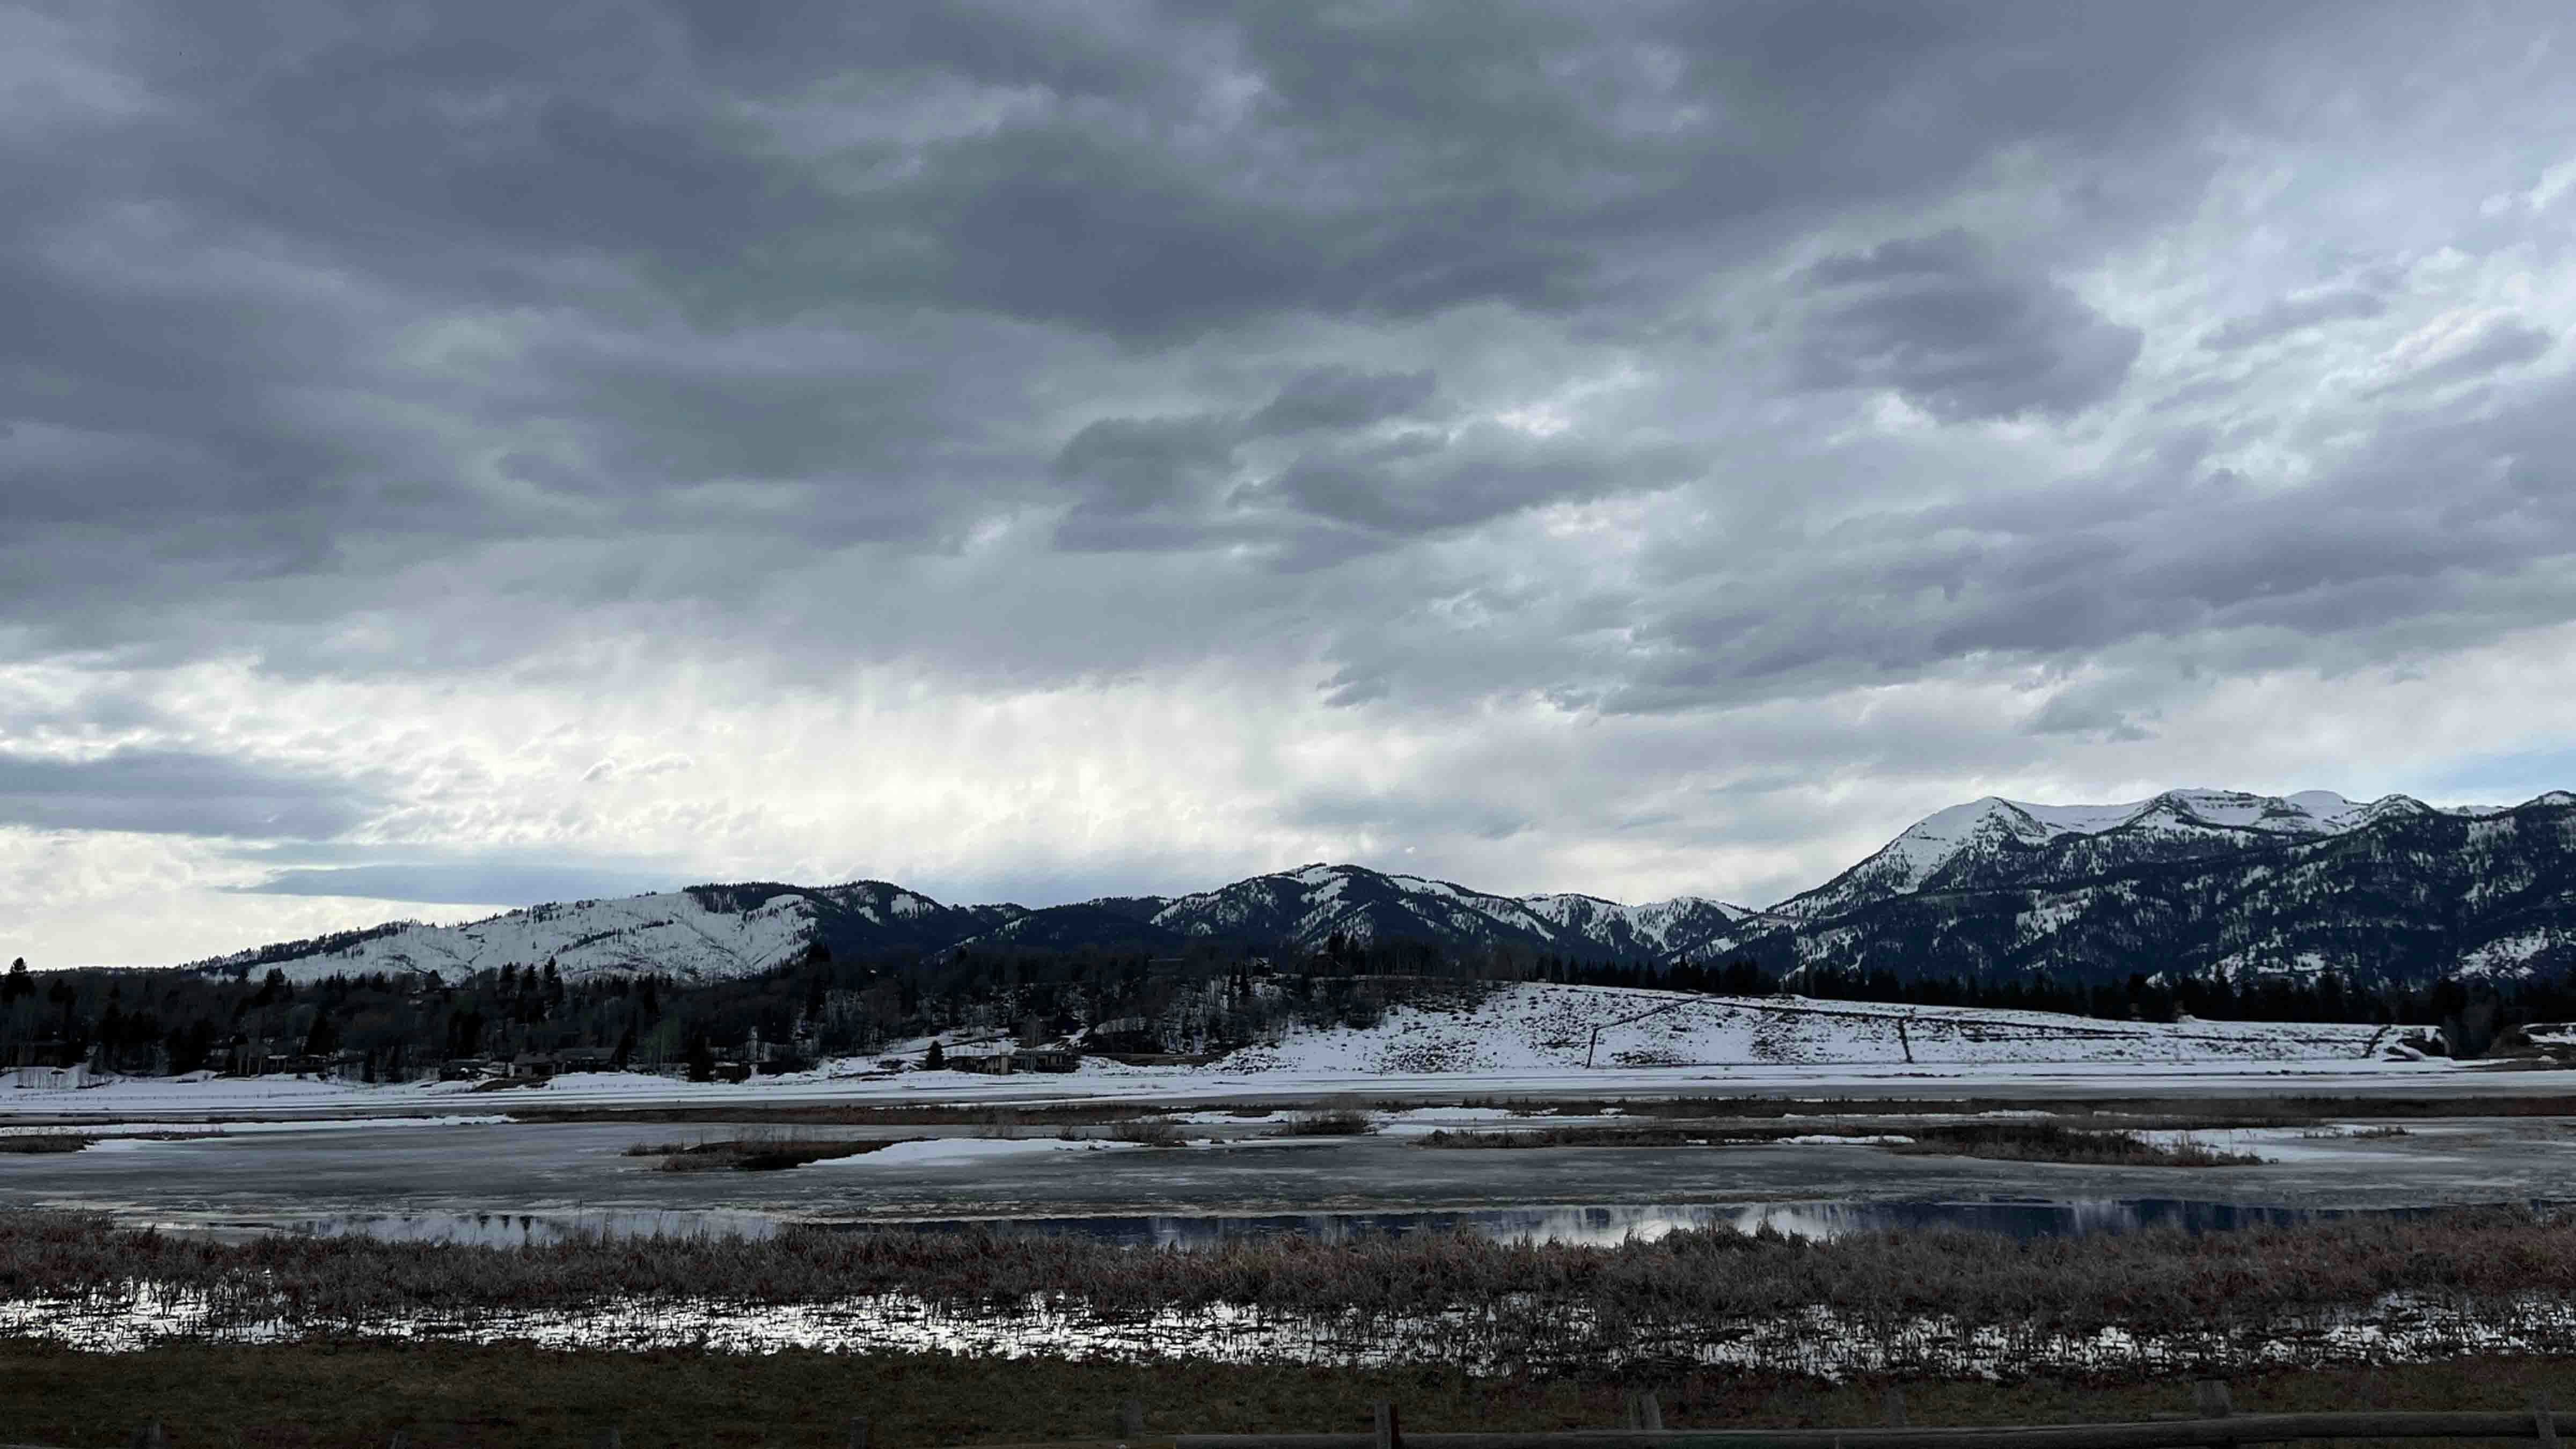 Taken from Highway 22 looking at Teton pass and the incoming storm on April 14, 2024